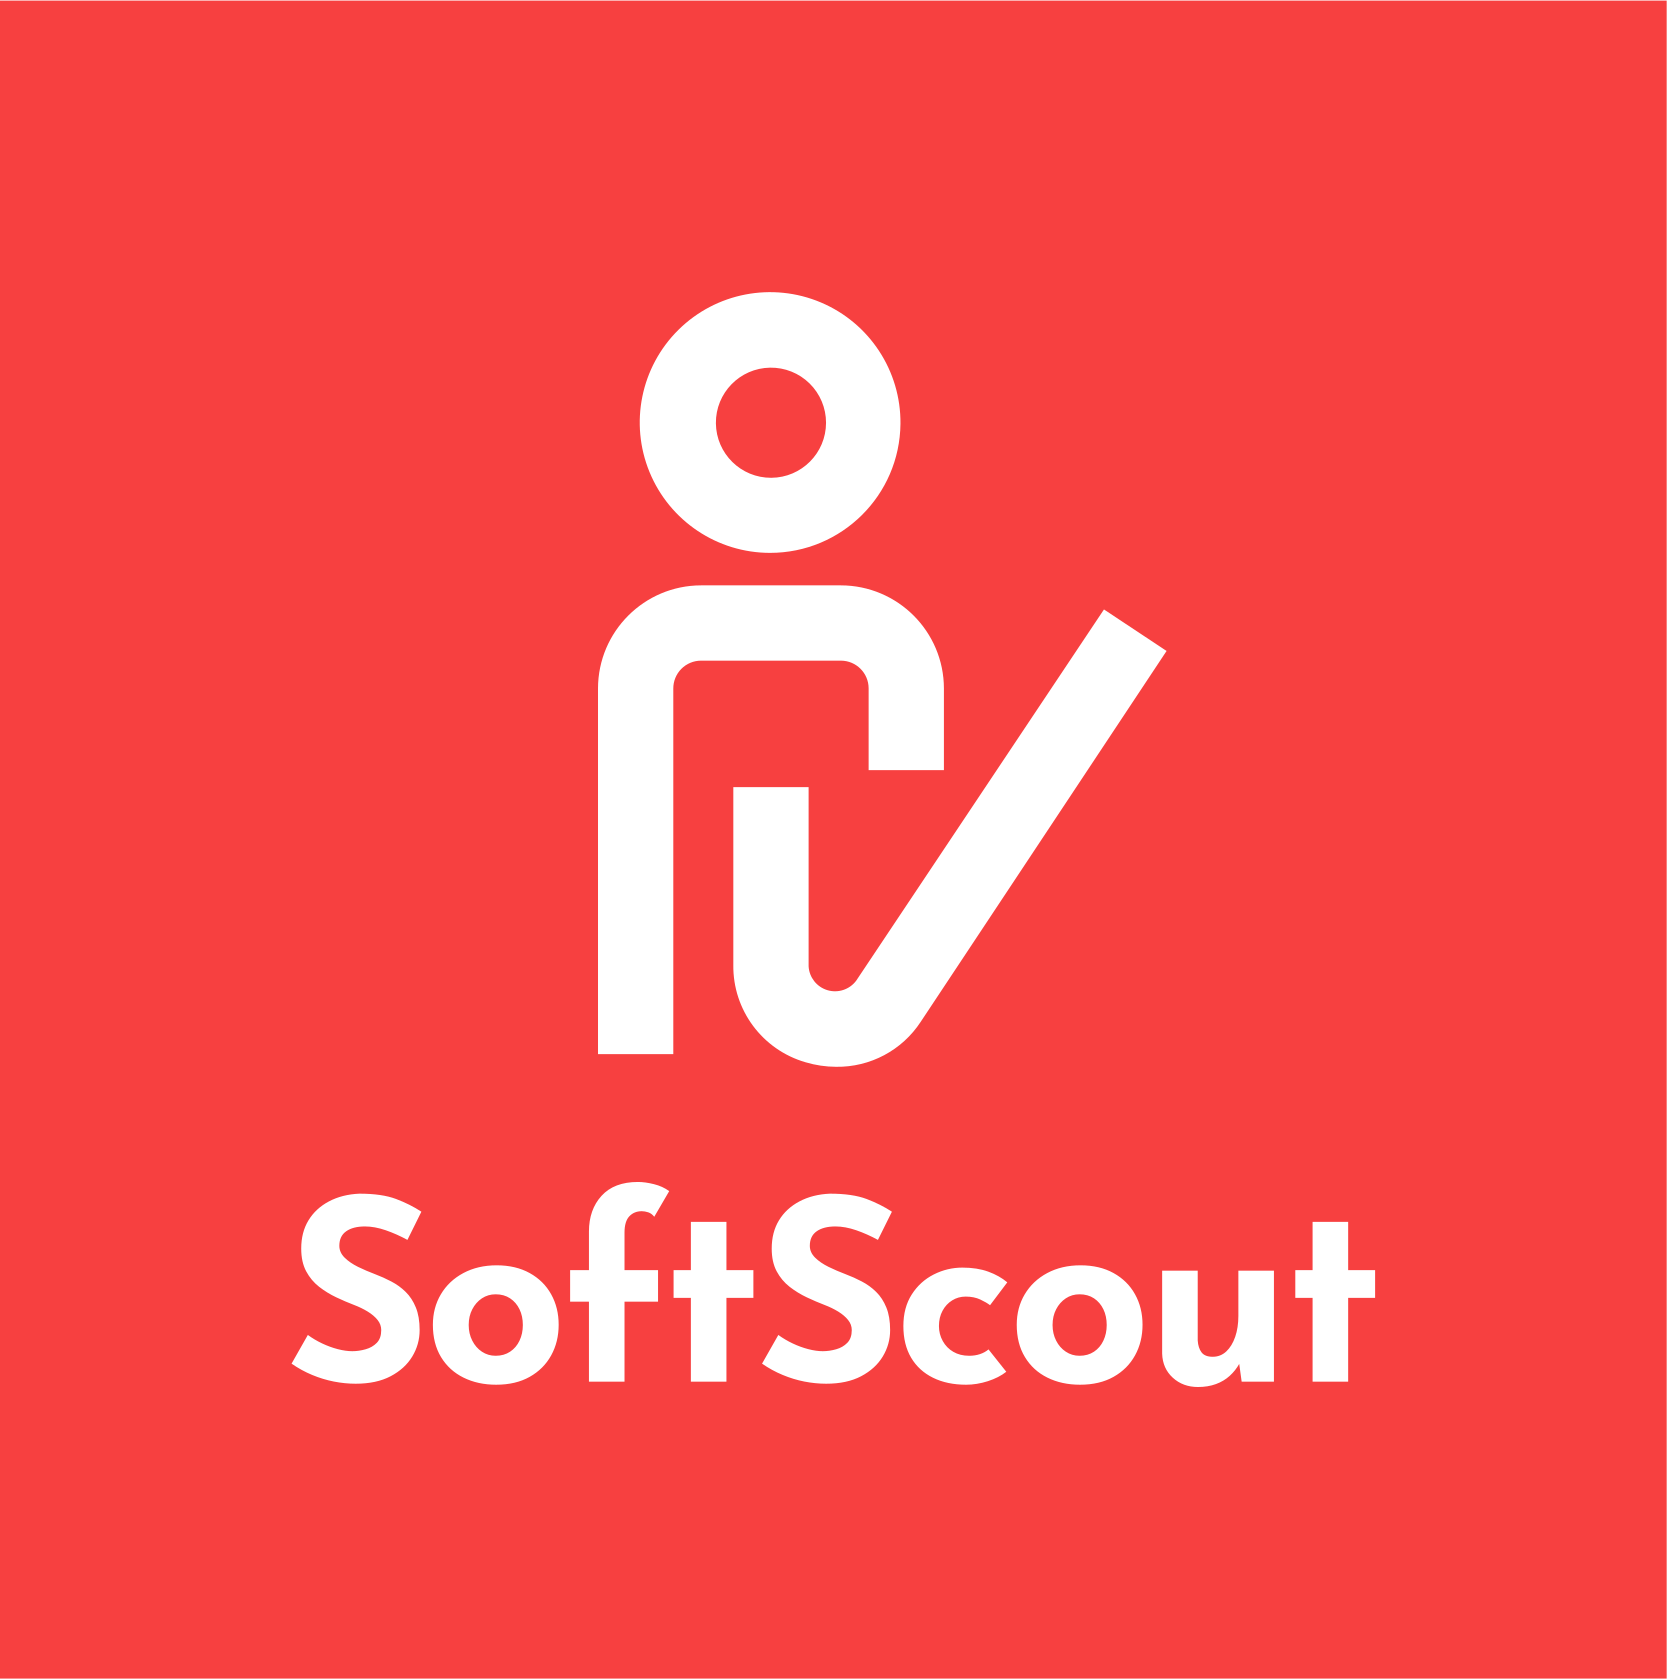 SoftScout